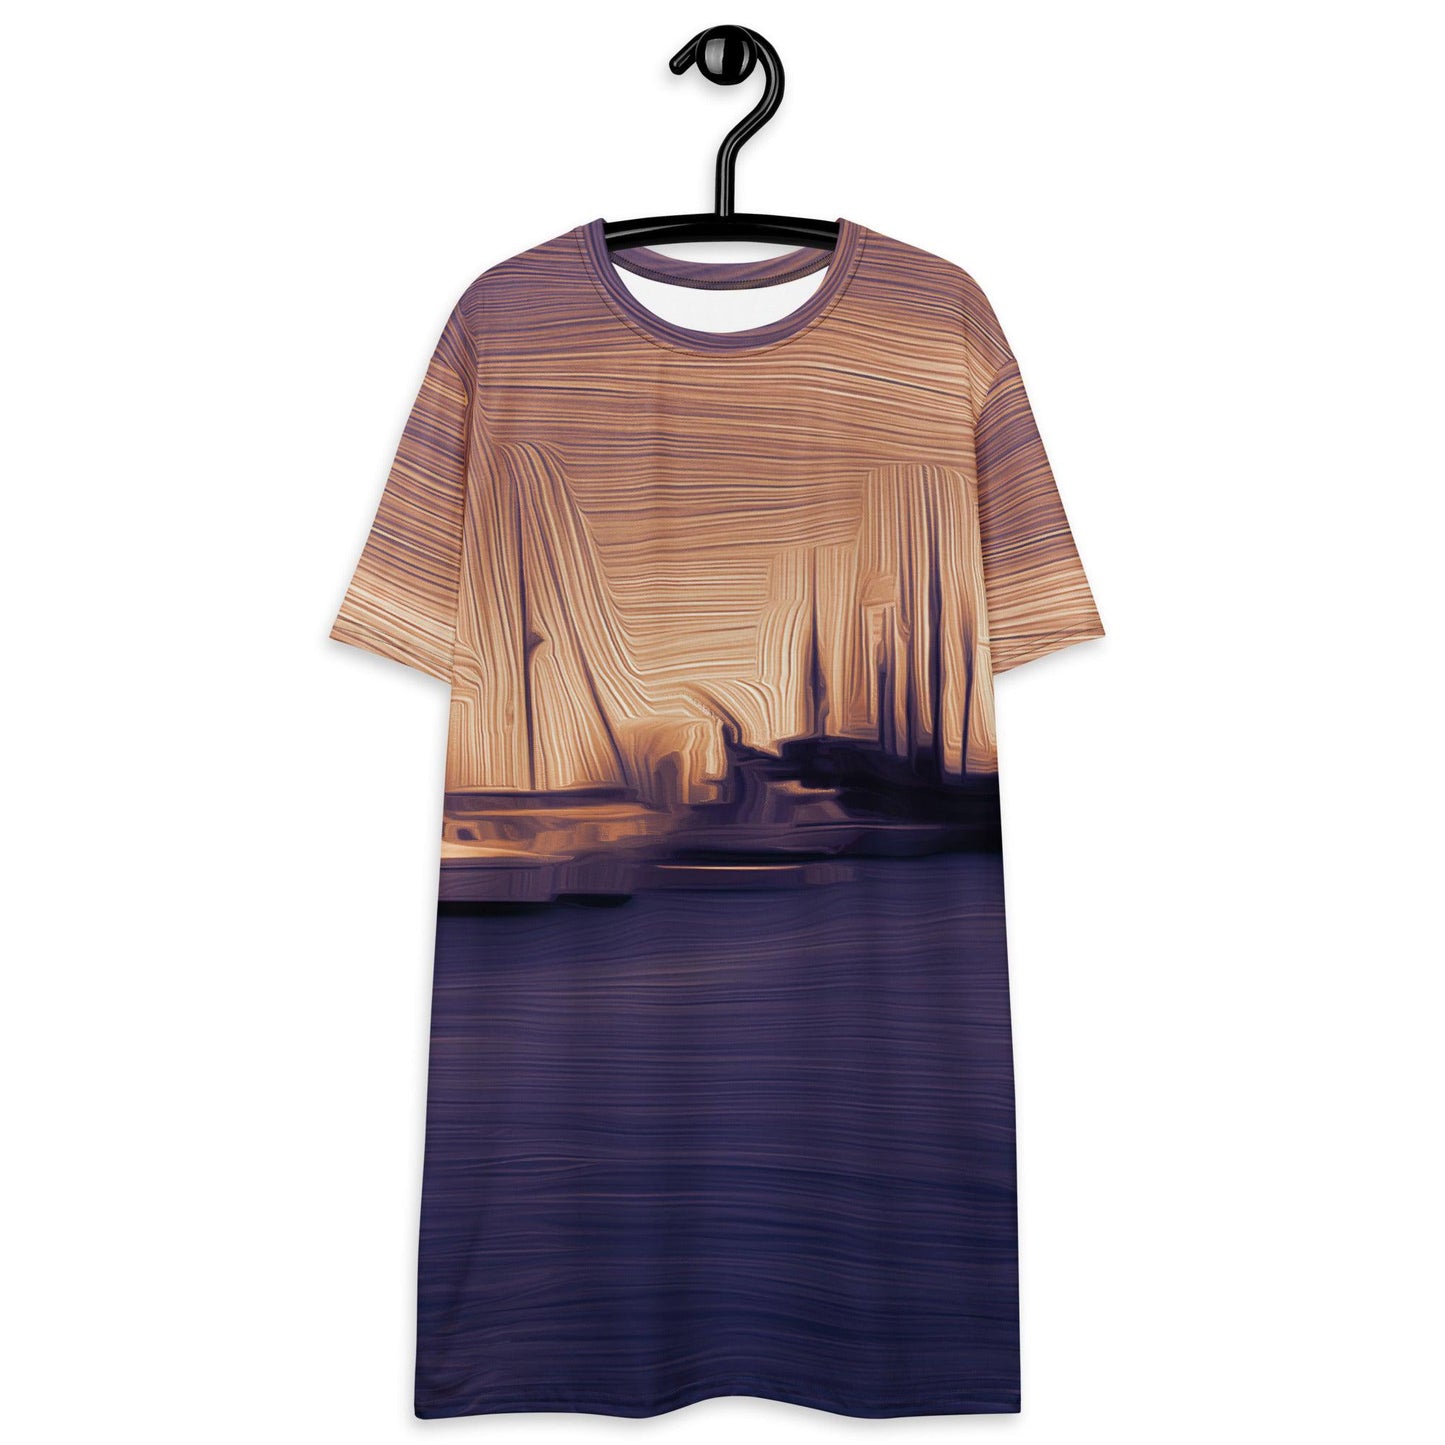 The Sleeping Yachts (at Sunset) - Womens T-Shirt Dress - iSAW Company